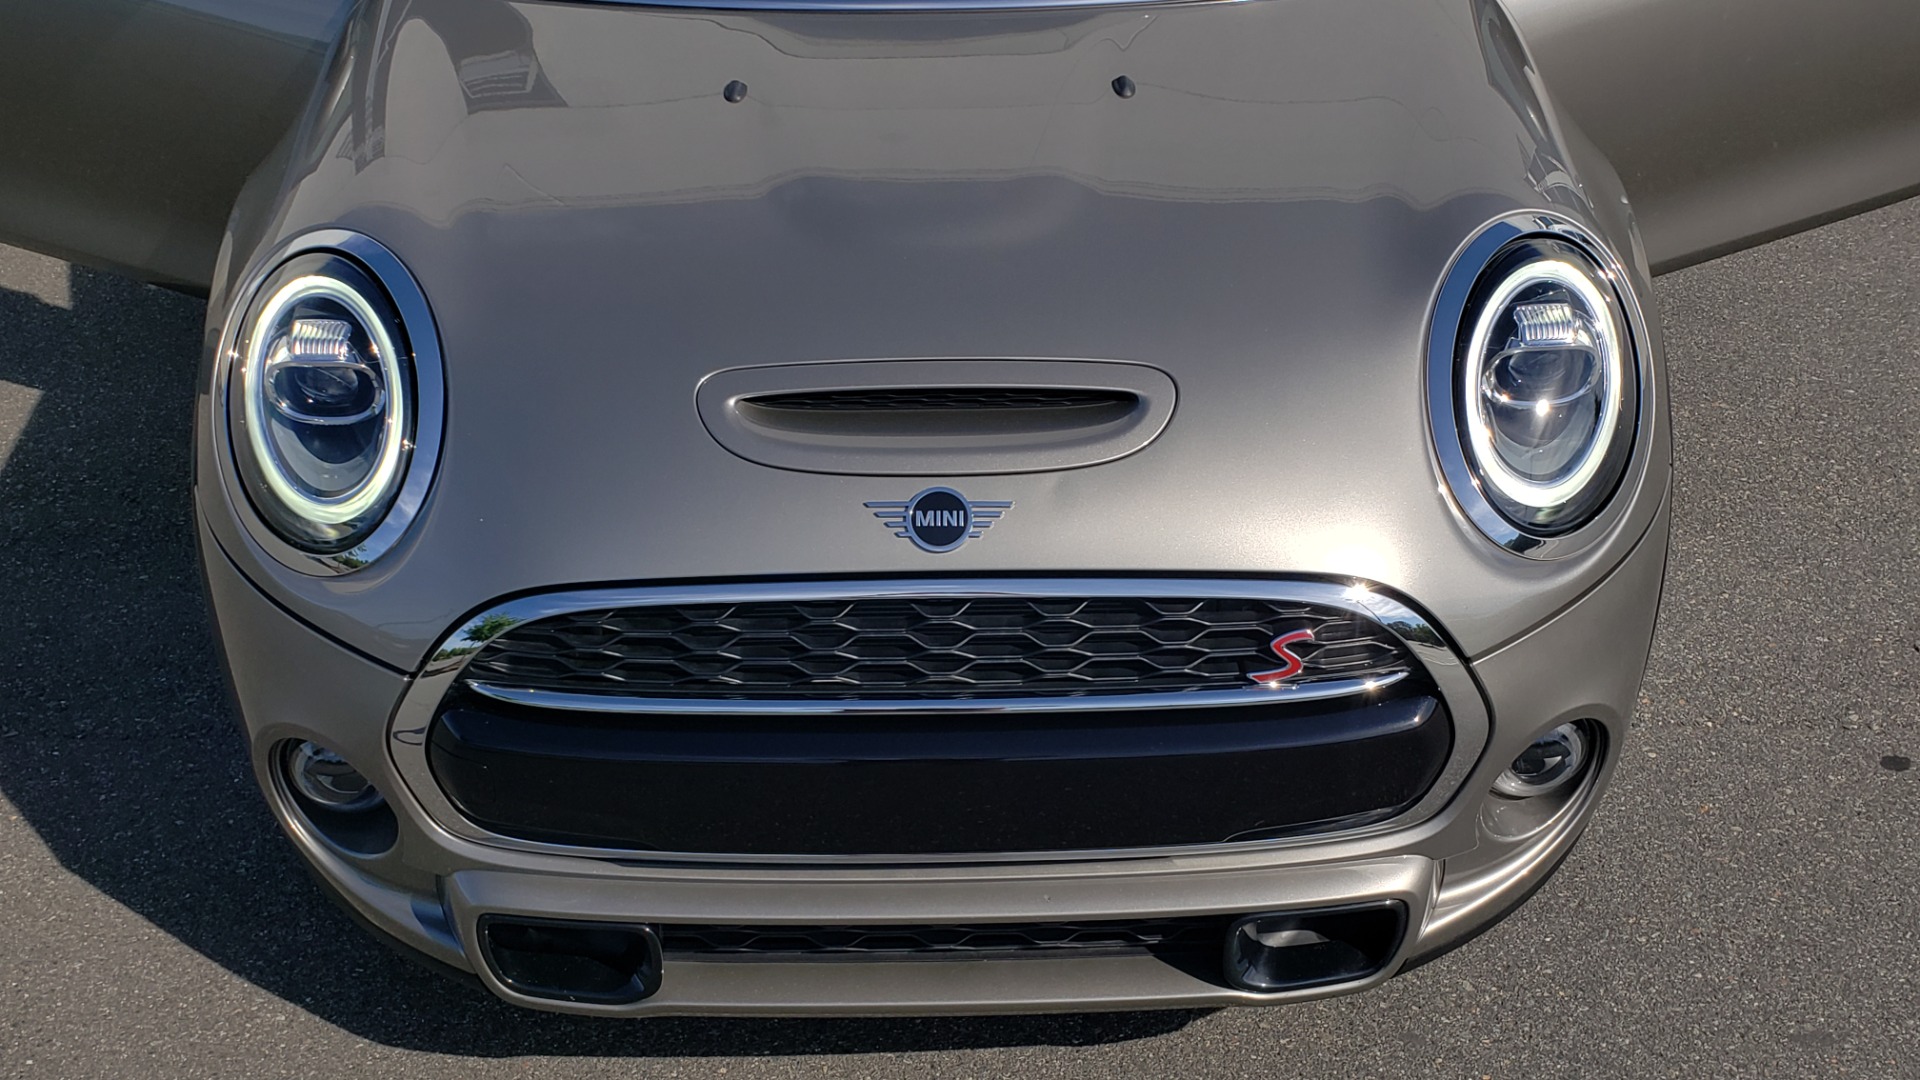 Used 2020 MINI HARDTOP 4 DOOR COOPER S / NAV / SUNROOF / AUTO / H/K SND / REARVIEW for sale Sold at Formula Imports in Charlotte NC 28227 28